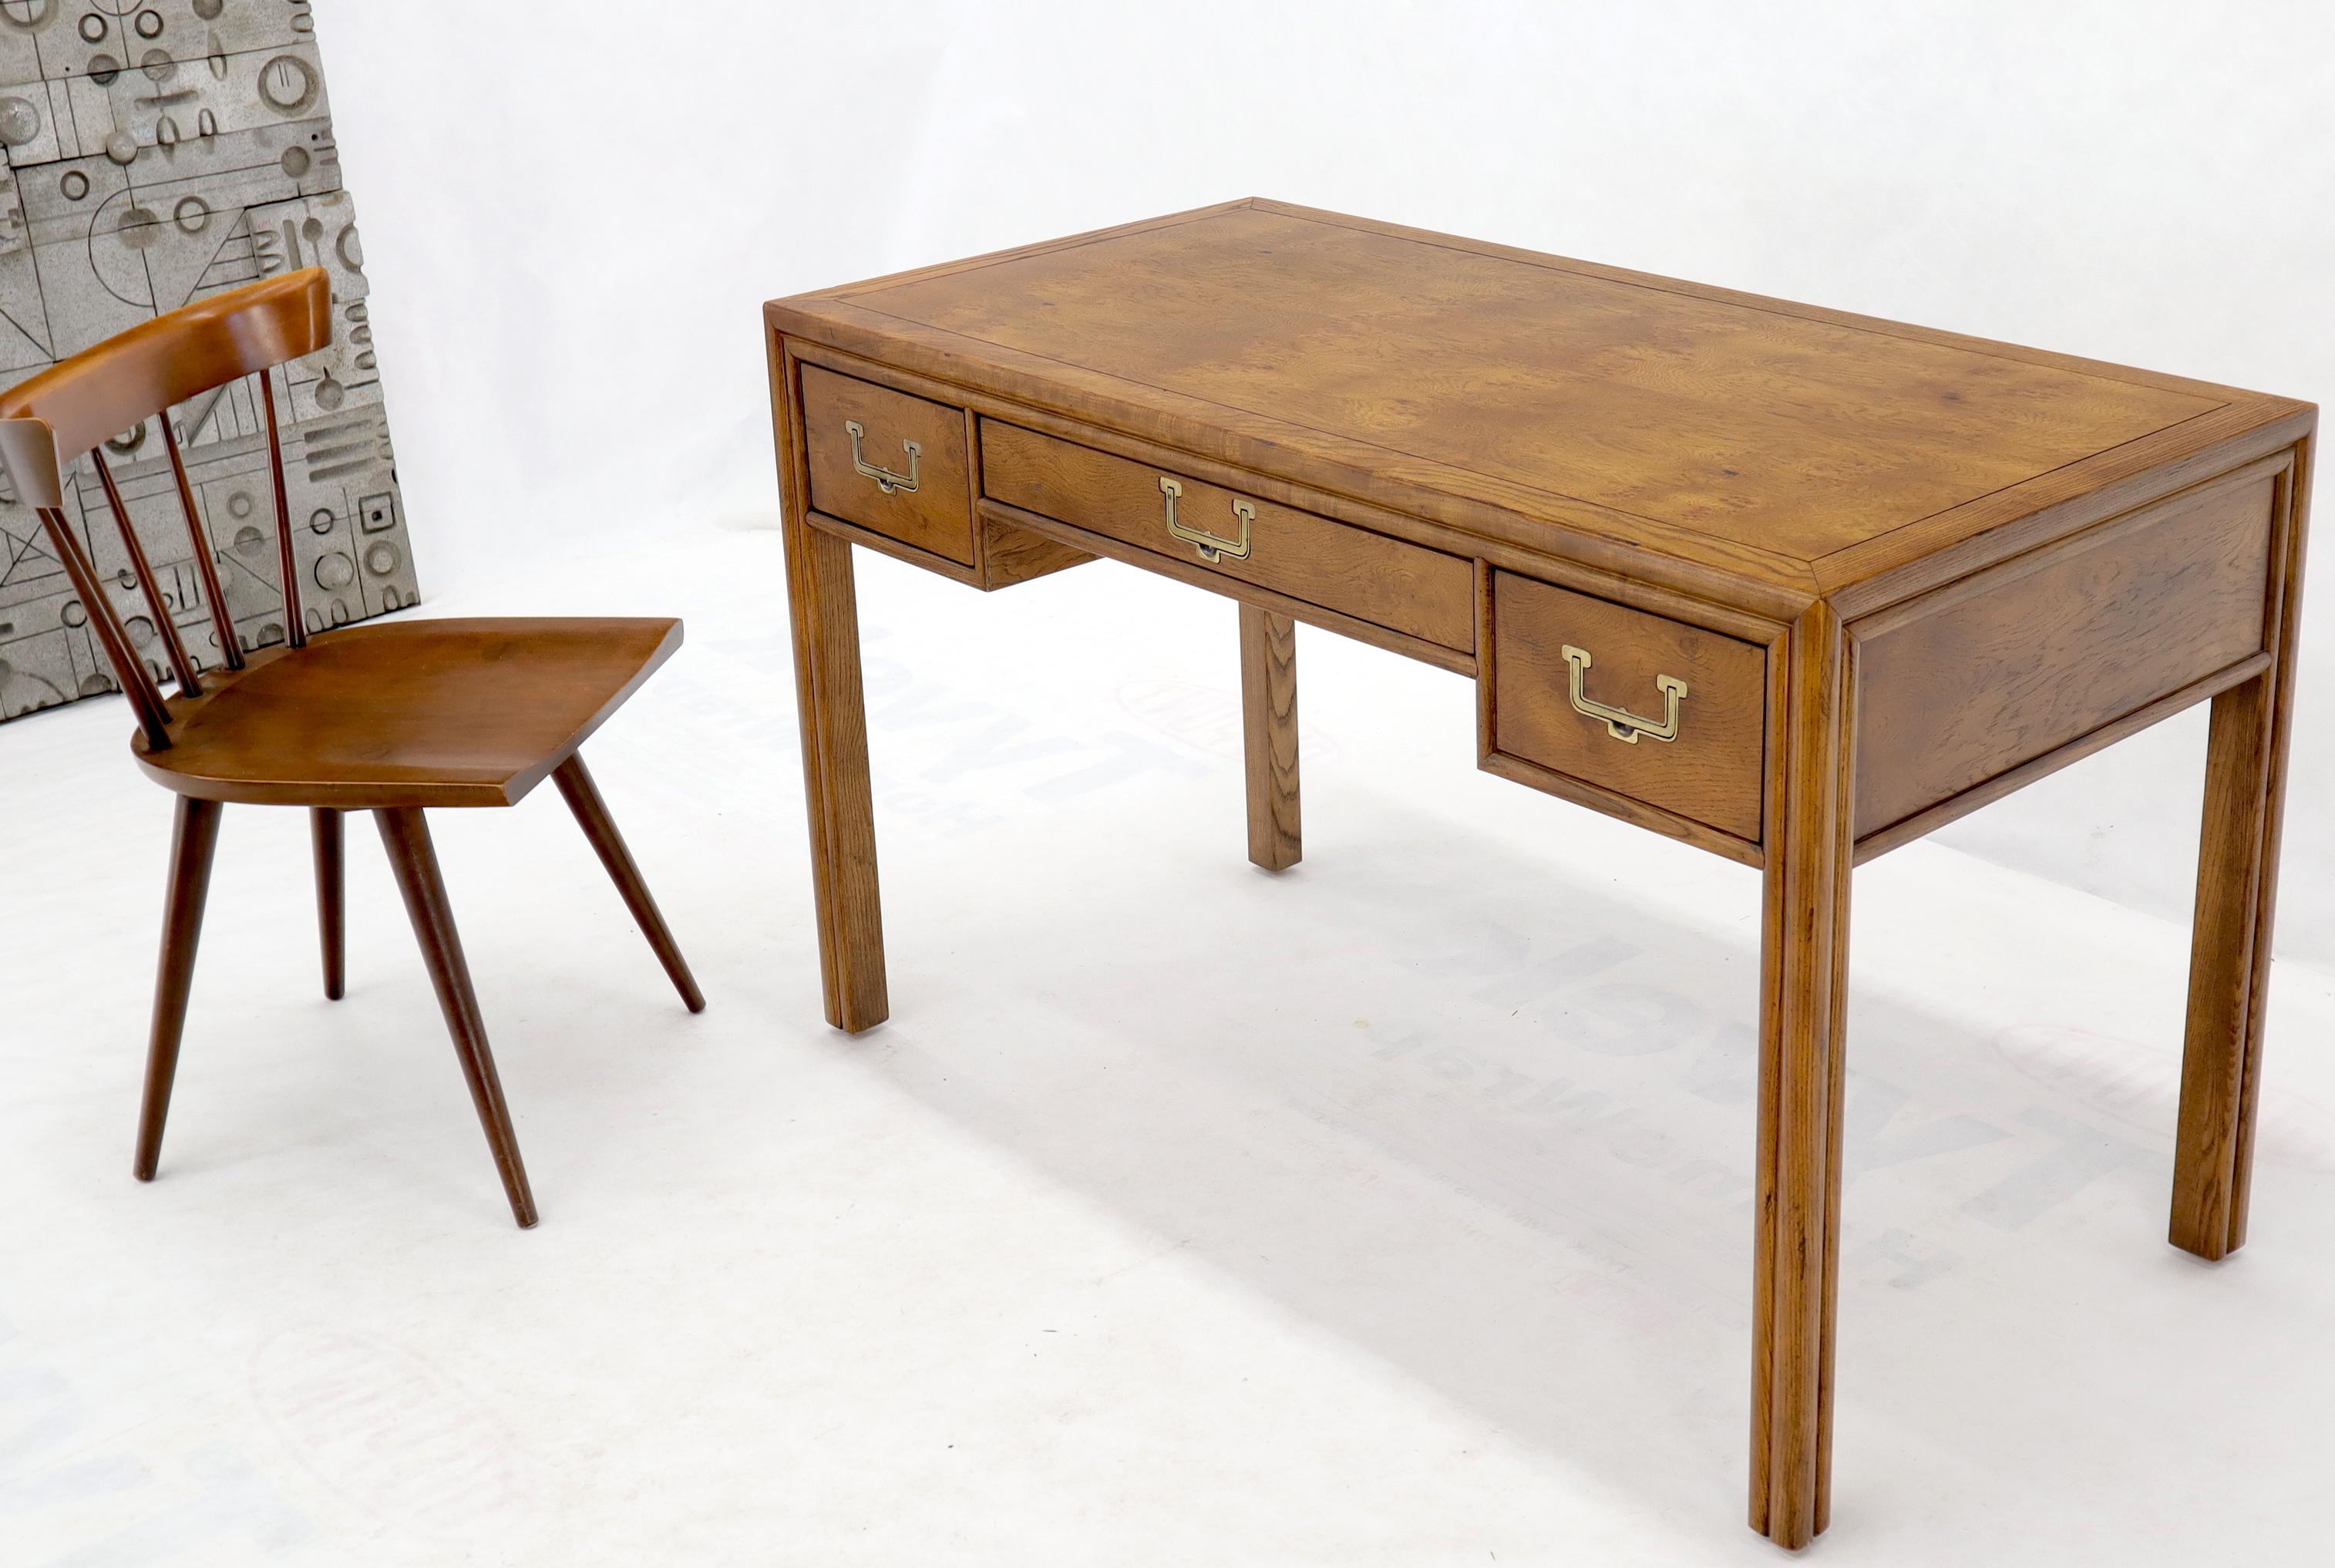 Brass hardware Campaign style Mid-Century Modern desk writing table by Henredon. Stunning fruitwood grain pattern along with outstanding craftsmanship.